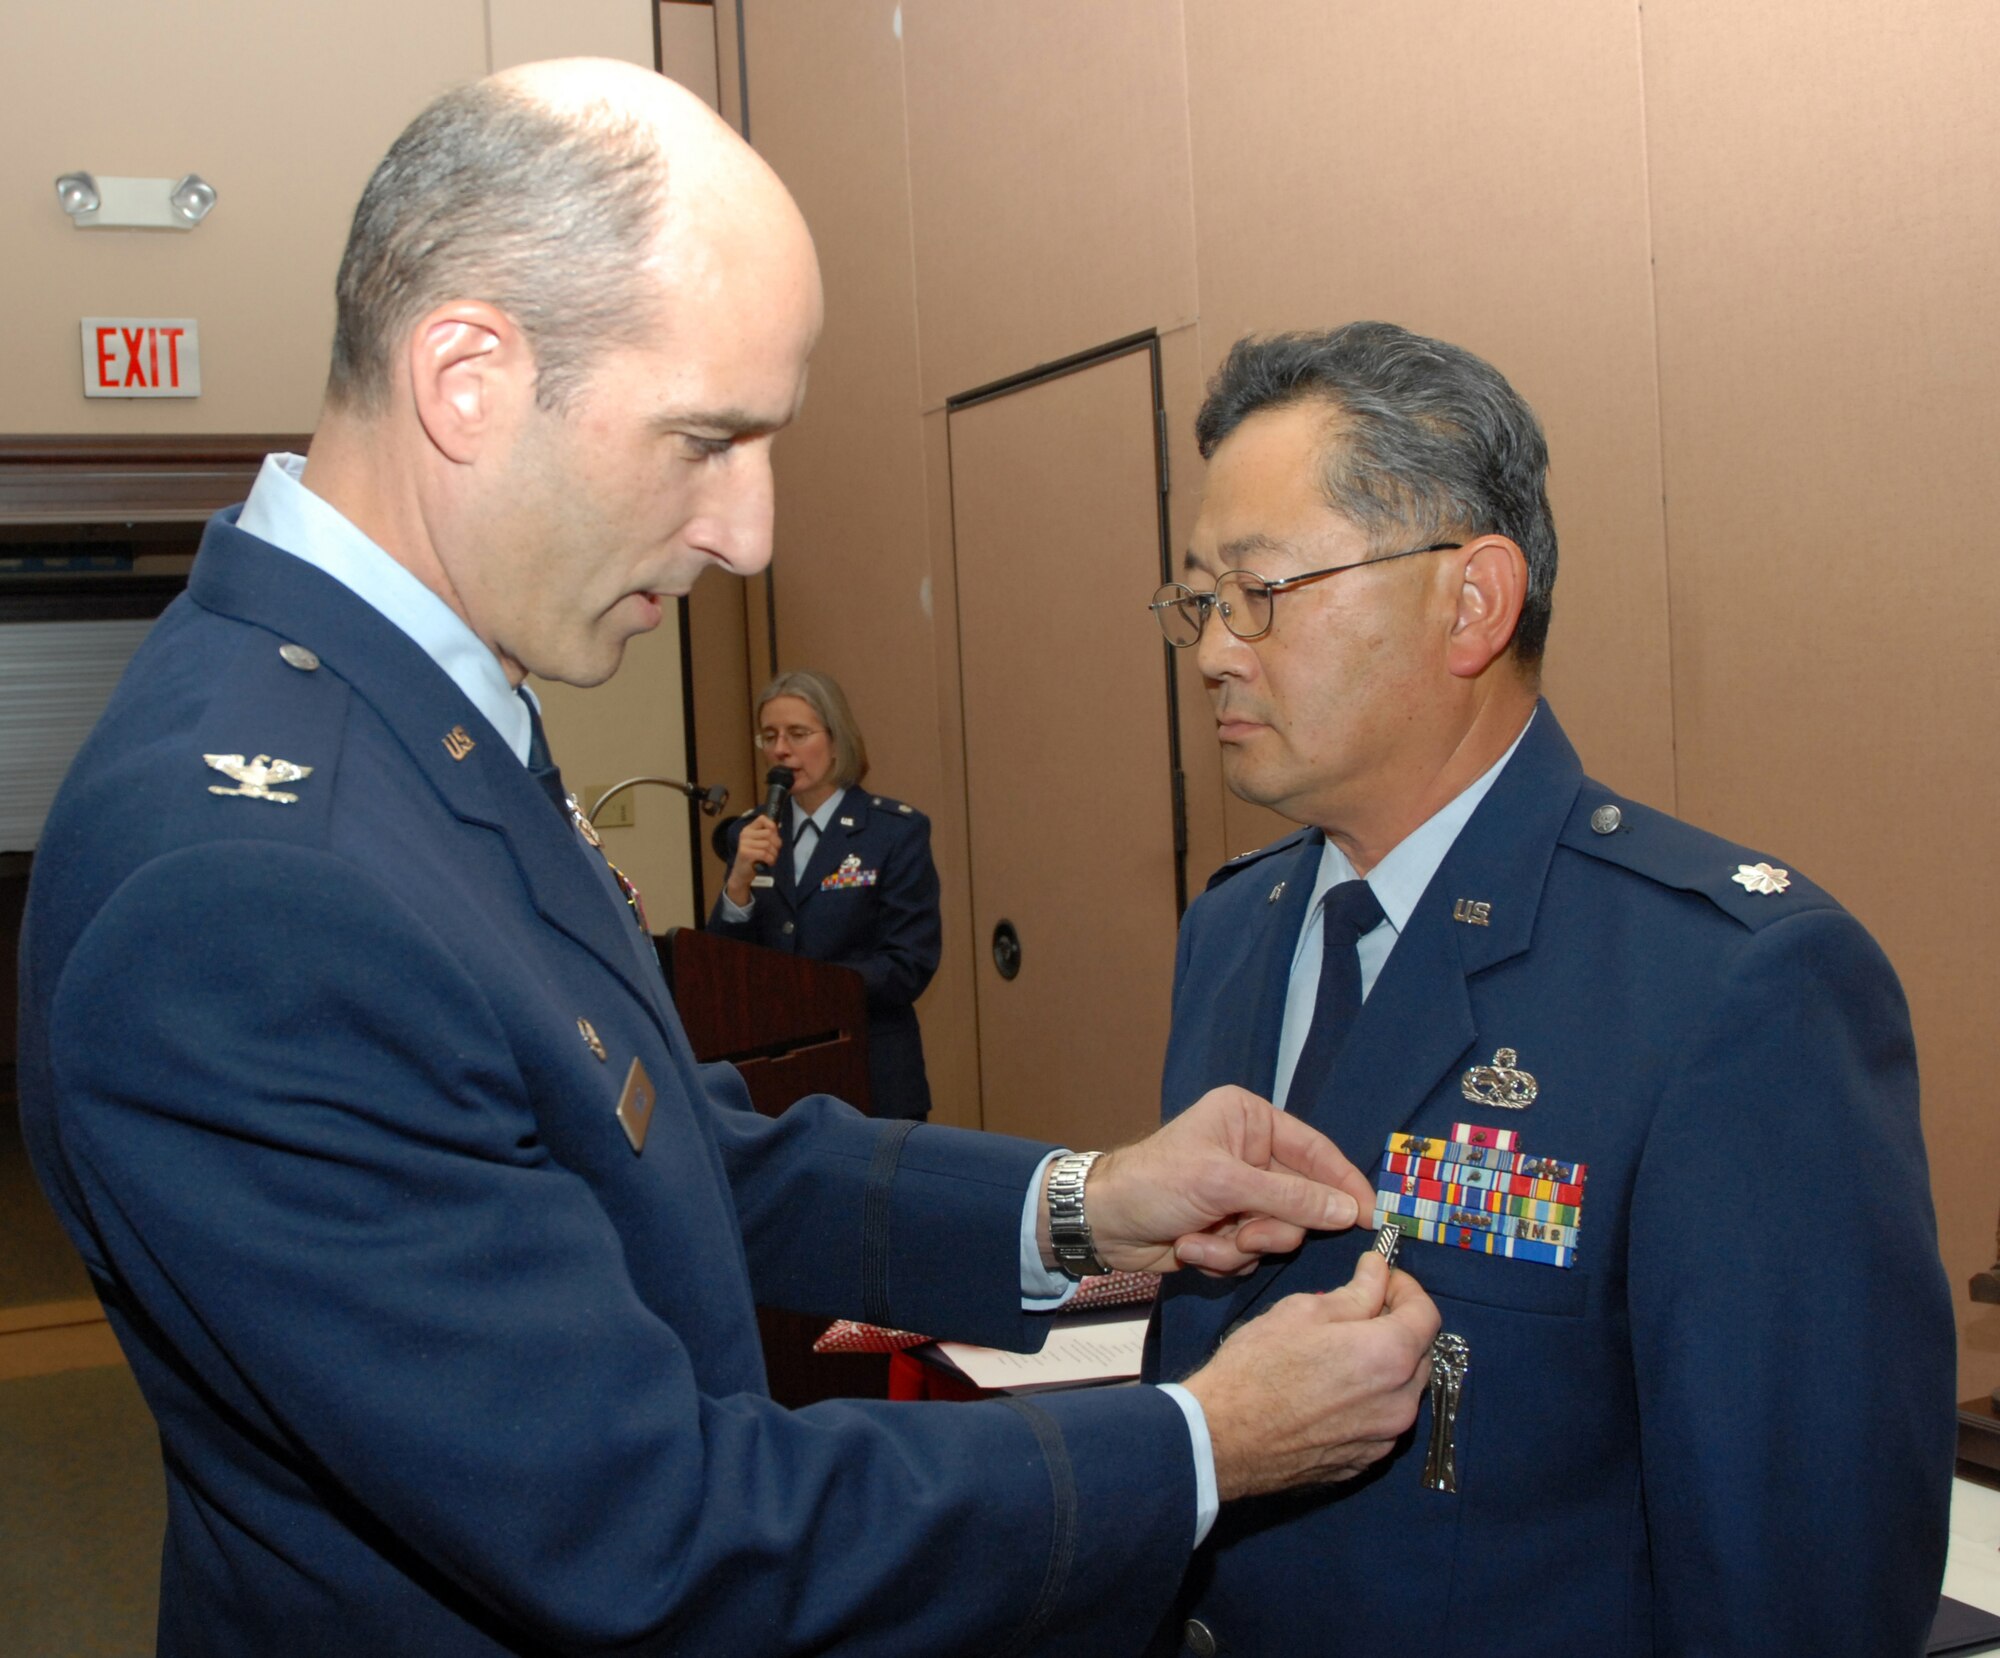 BEALE AIR FORCE BASE, Cailf. -- 940th Air Refueling Wing commander Col. Jeffrey "Sal" Mineo pins the Meritorious Service medal on Air Force Reservist, Lt. Col. Djoko Soejoto during his retirement ceremony here, Jan. 10, 2009. Lt. Col. Soejoto retired from the Air Force Reserve after 31 years of honorable service. He has served in various leadership positions within the 940th ARW. It was the first retirement ceremony for Col. Mineo as wing commander.  
(U.S. Air Force Photo/ Tech. Sgt. Luke Johnson)